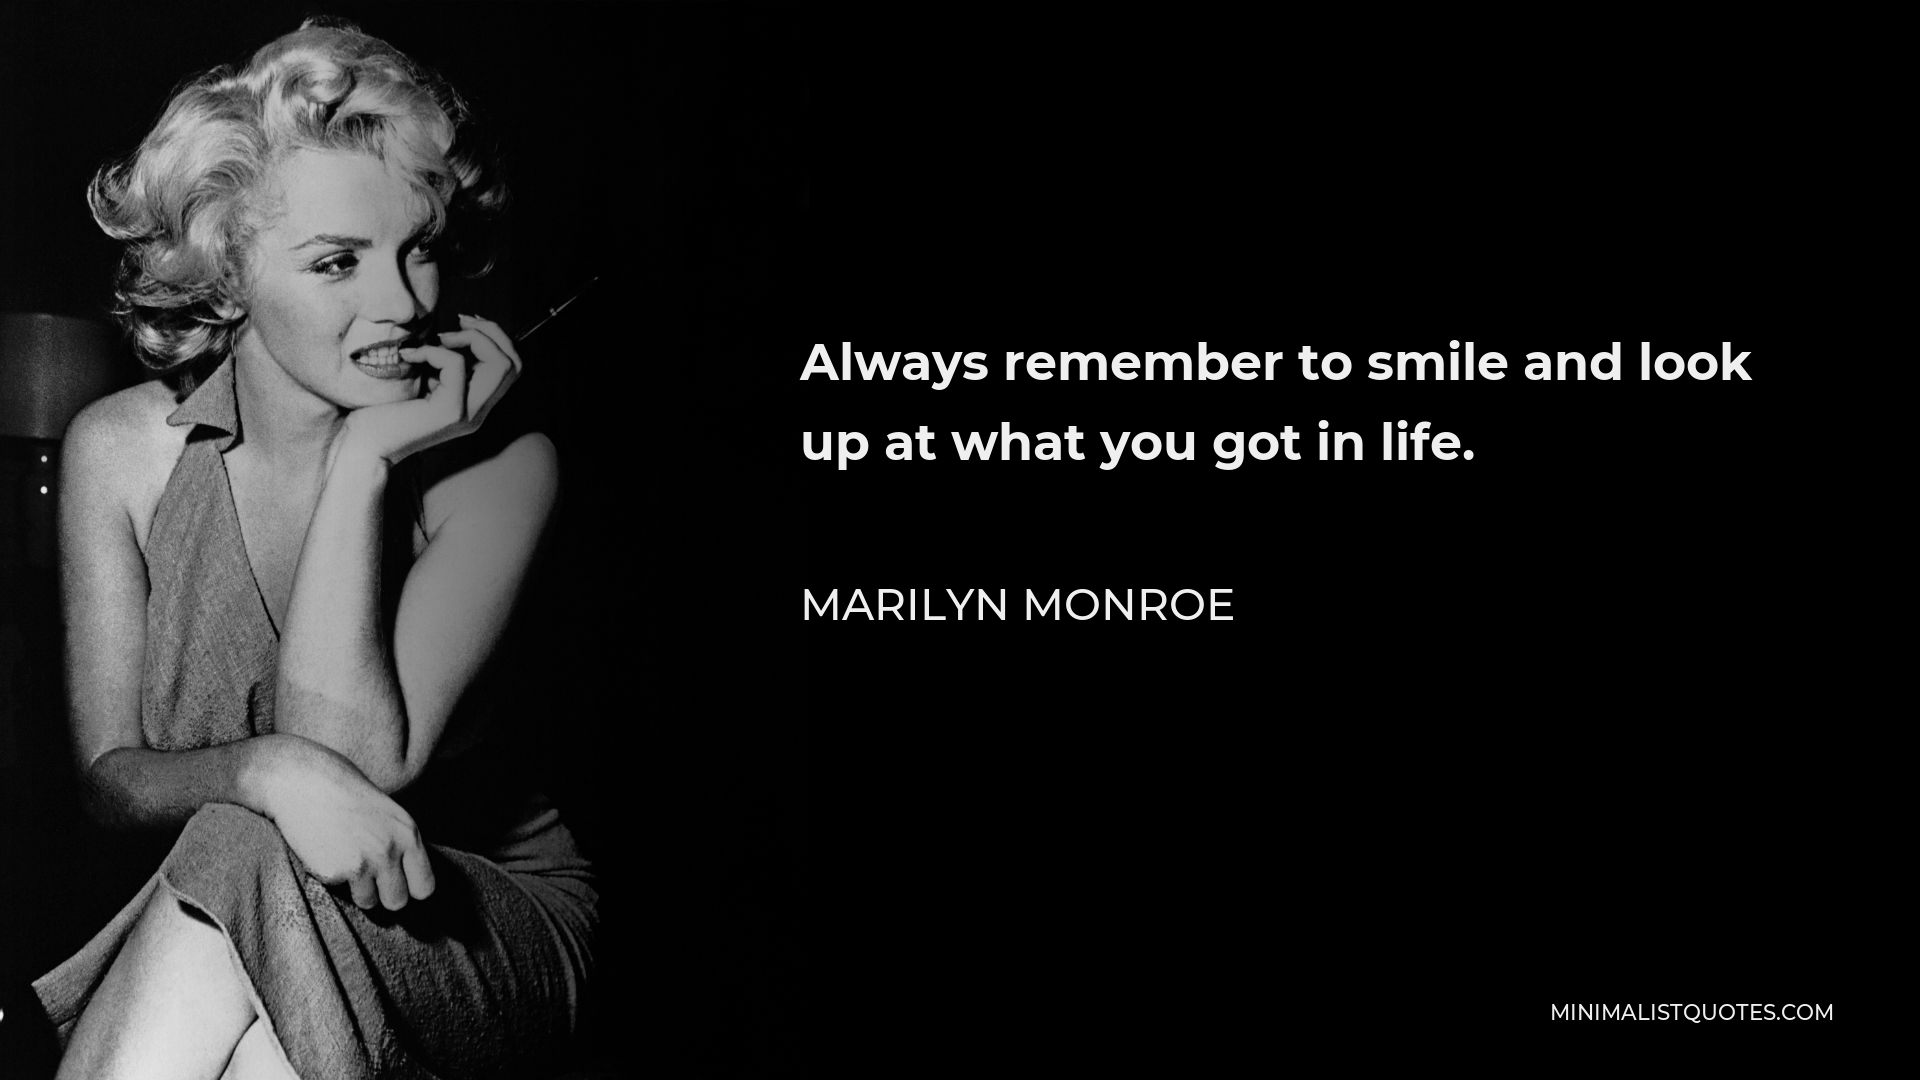 Marilyn Monroe Quote - Always remember to smile and look up at what you got in life.